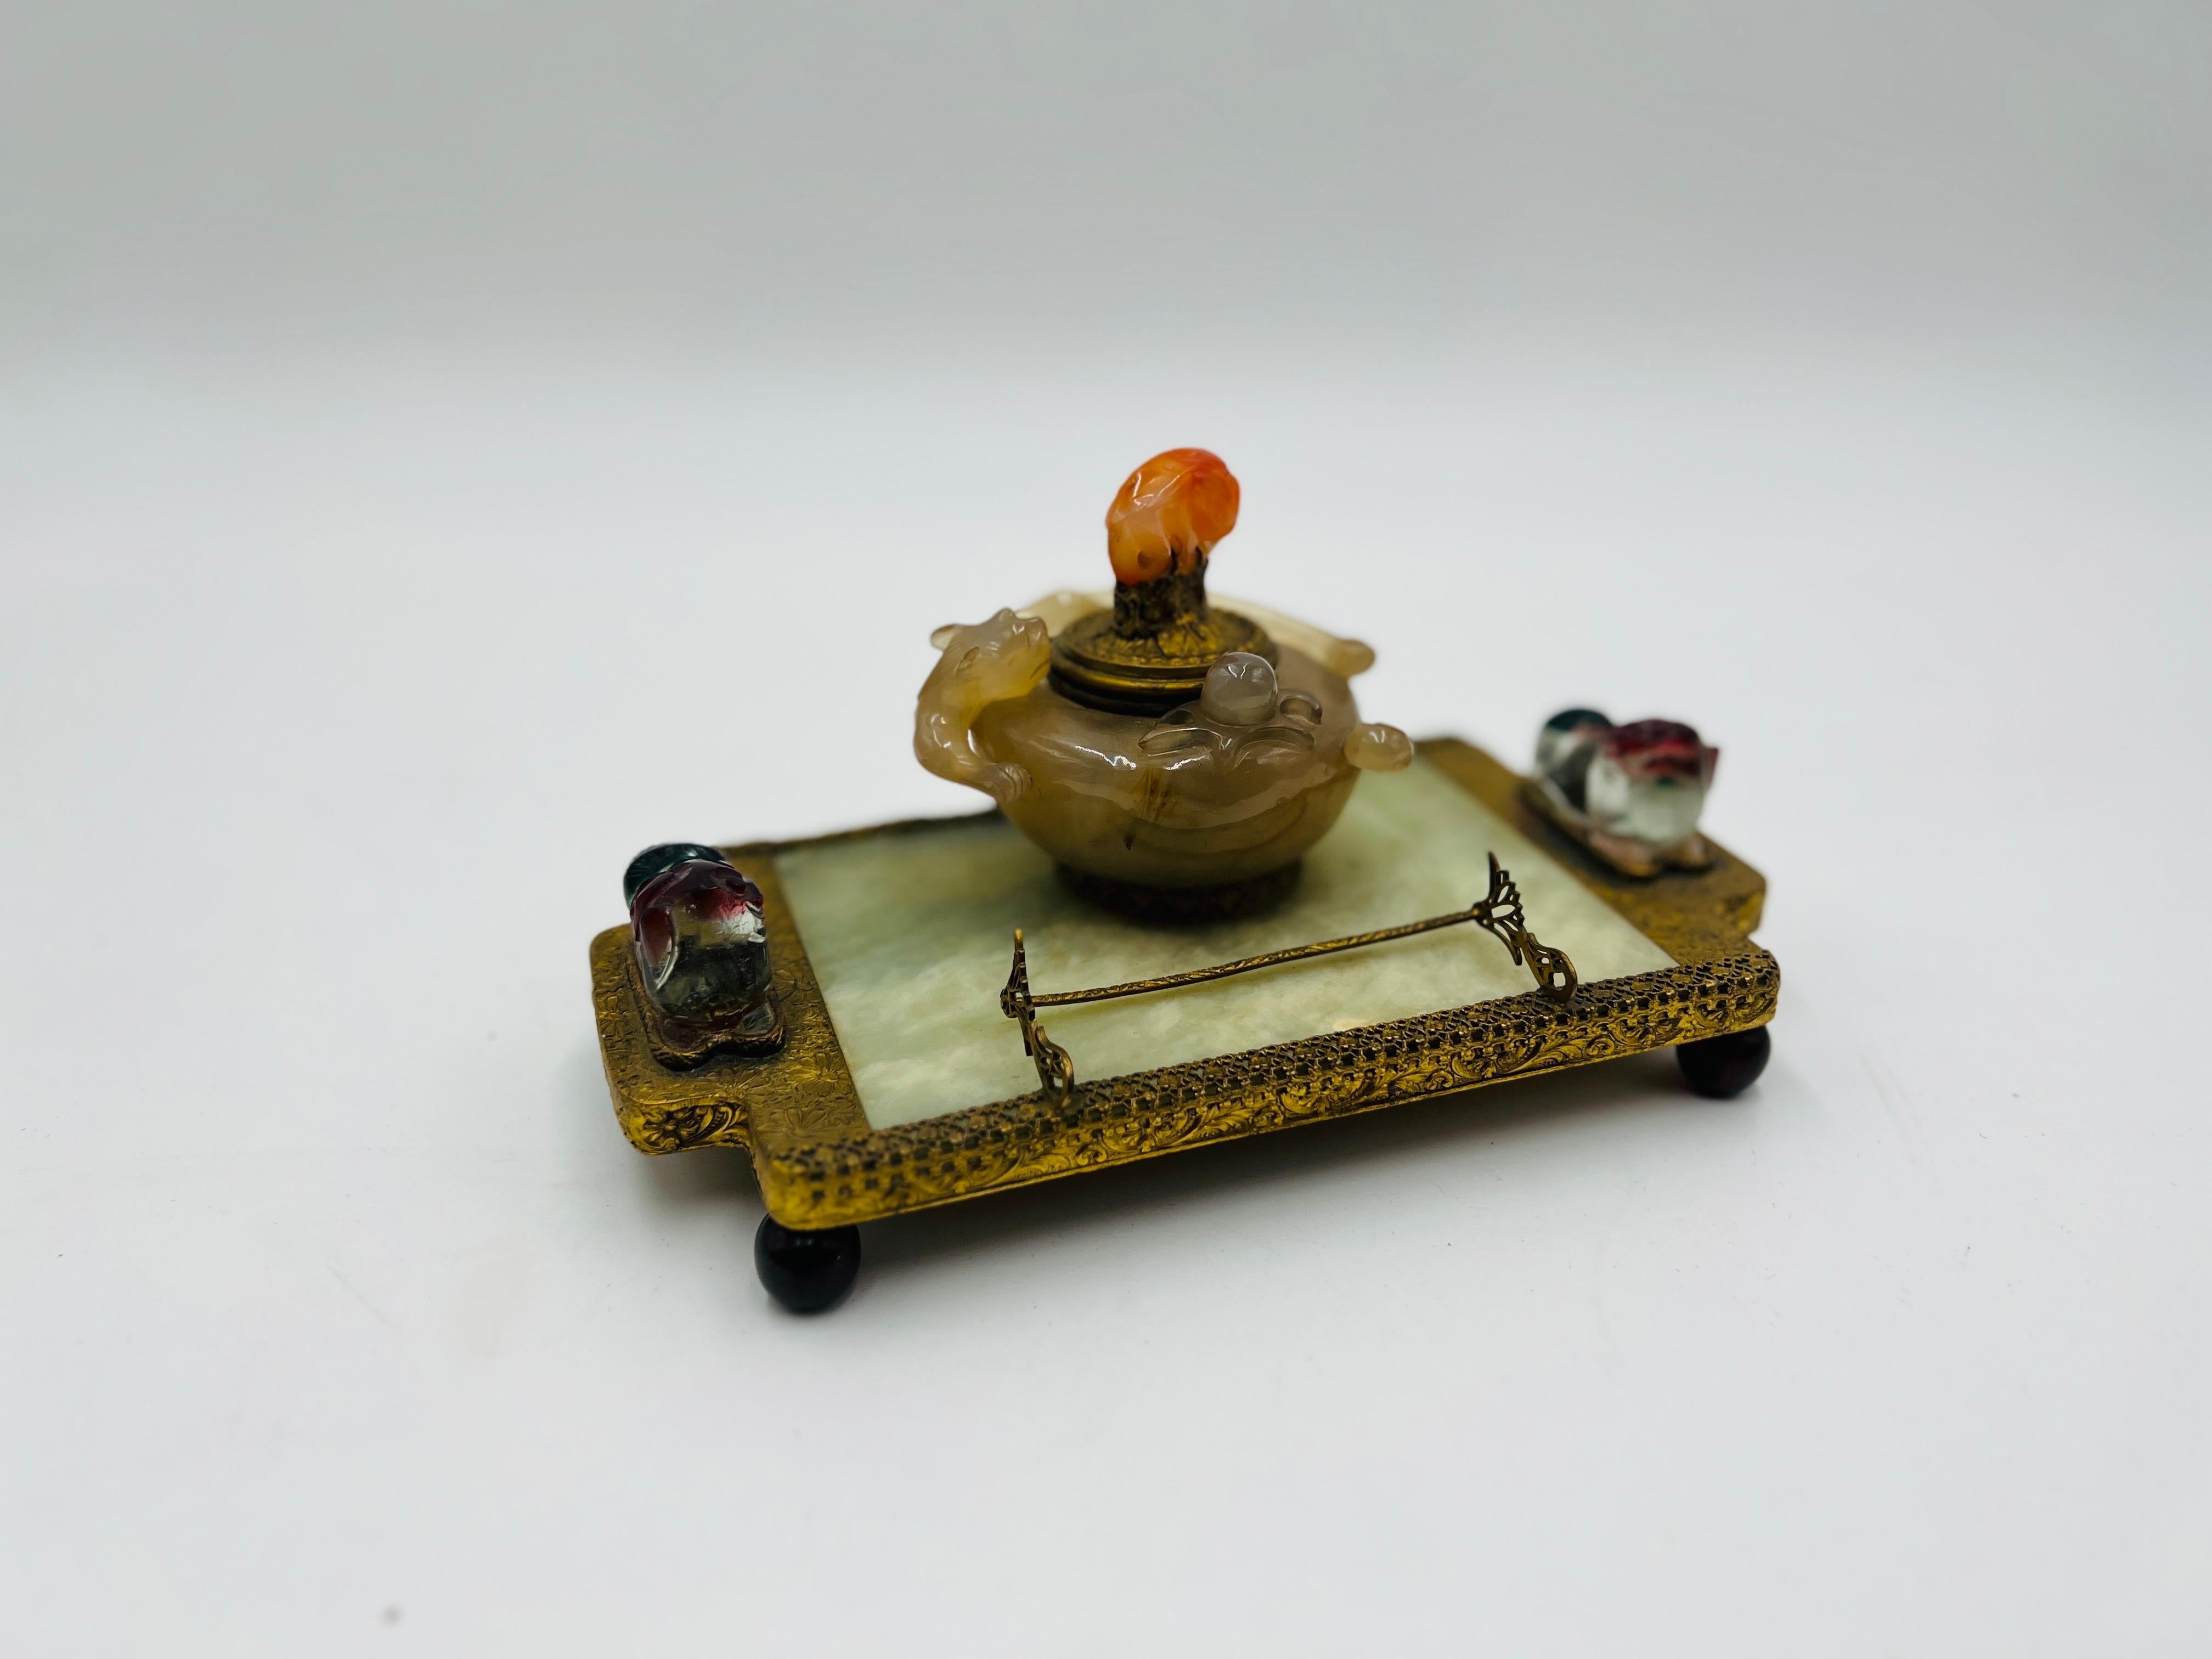 Edward Farmer Chinese Carved Jade & Agate Dragon Inkwell W/ Gold Gilt Filigree.
Edward I. Farmer (1872-1942) was a well-known art dealer in New York City with over twenty-nine years of experience in the field. His galleries at 5 West Fifty-Sixth